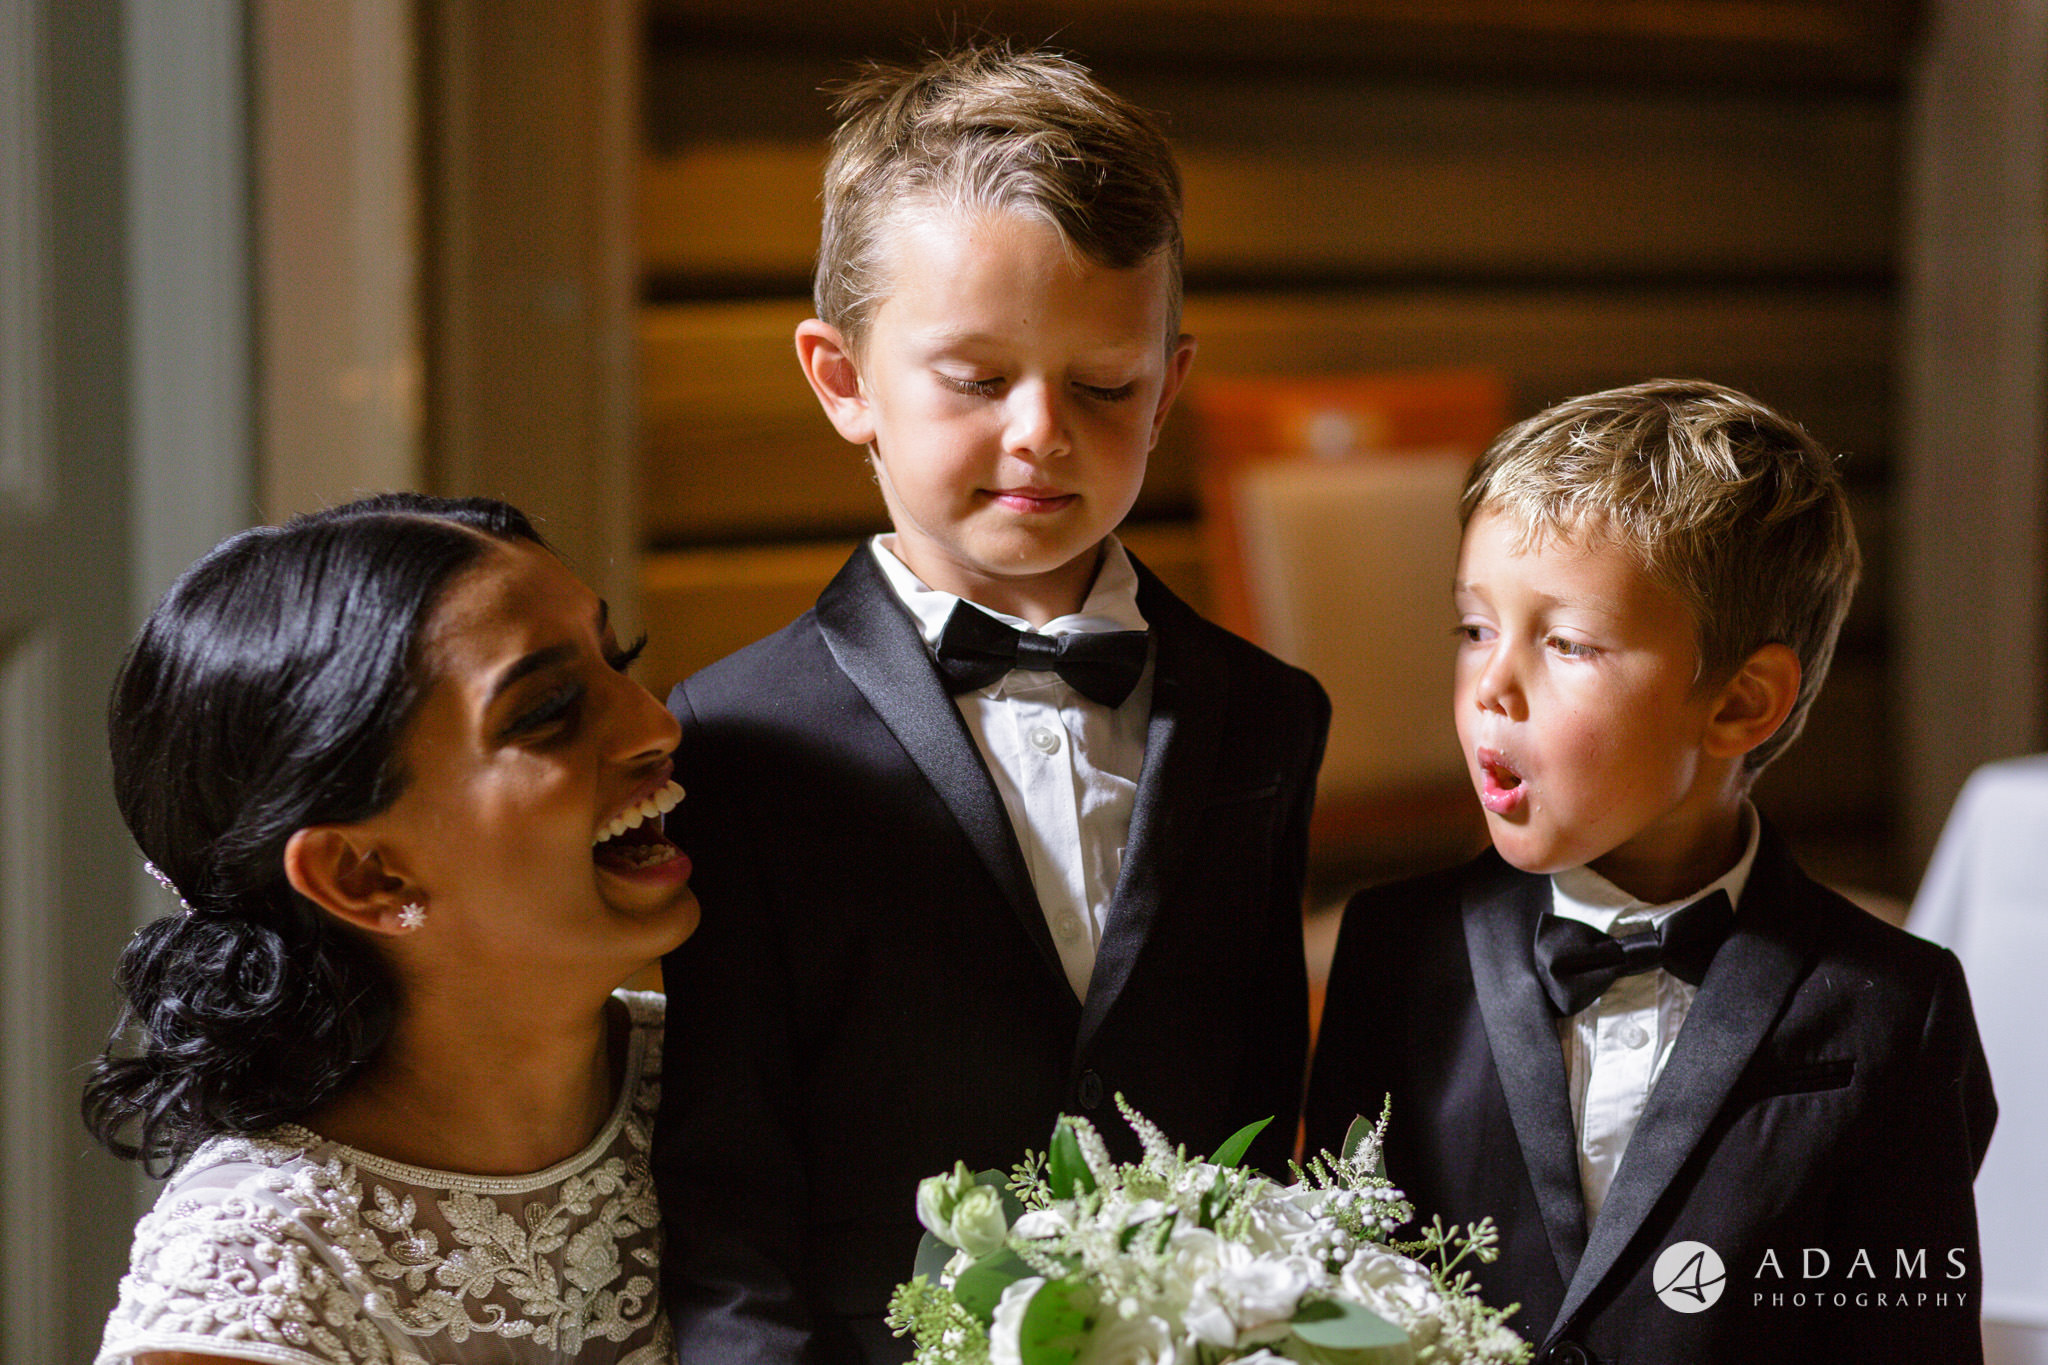 Oslo Wedding Photography kids smile and laugh